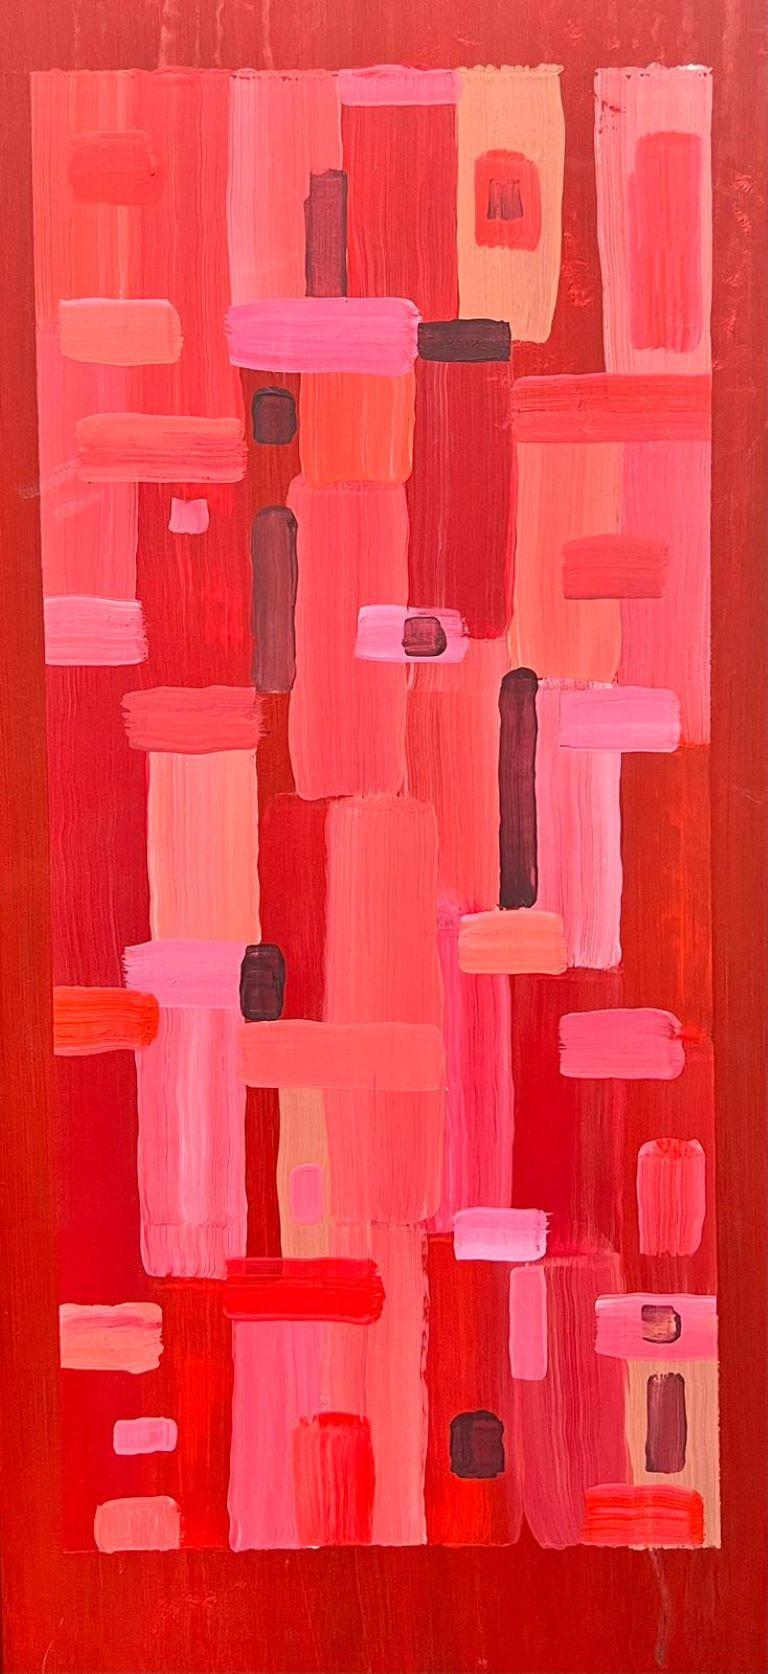 Contemporary British Abstract Painting - Abstract Geometric Cubist British Painting Abstract Shapes Pinks Reds